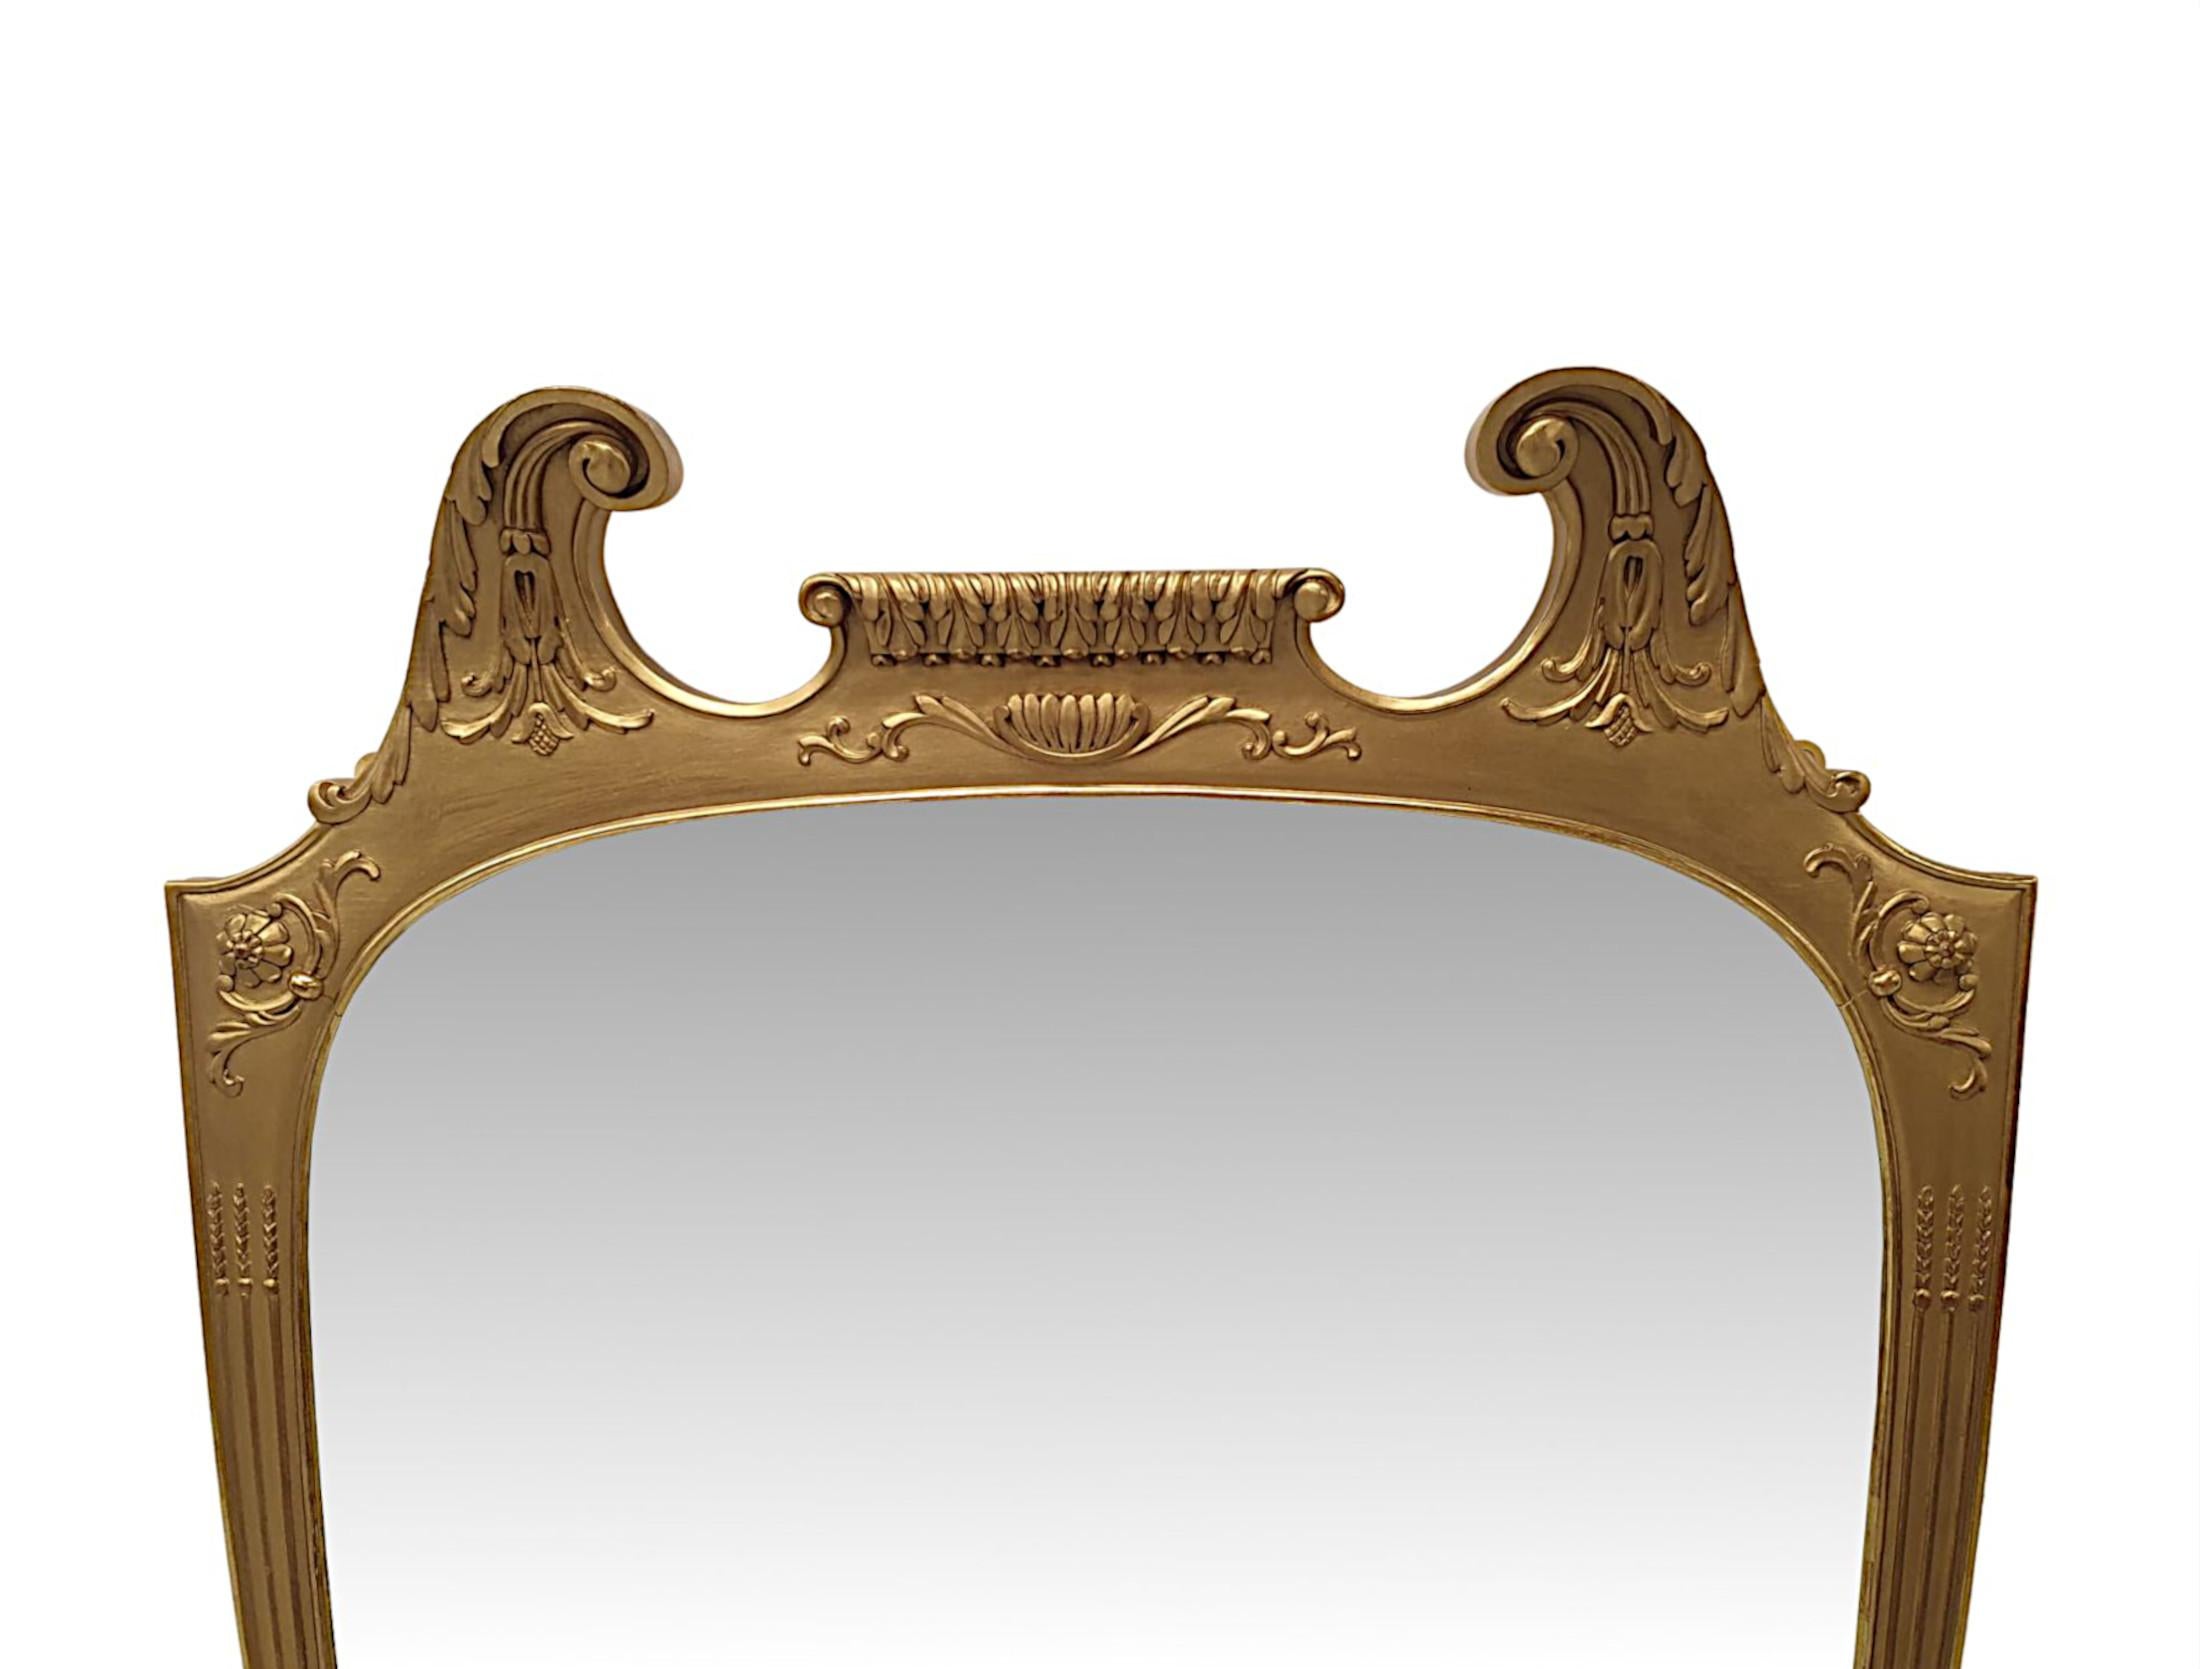 A very fine 19th Century giltwood overmantle or hall mirror. The mirror glass plate of oval form set within a stunning hand carved, moulded giltwood frame with foliate and reeded border detail and with flowerhead and scrolling foliate motif detail